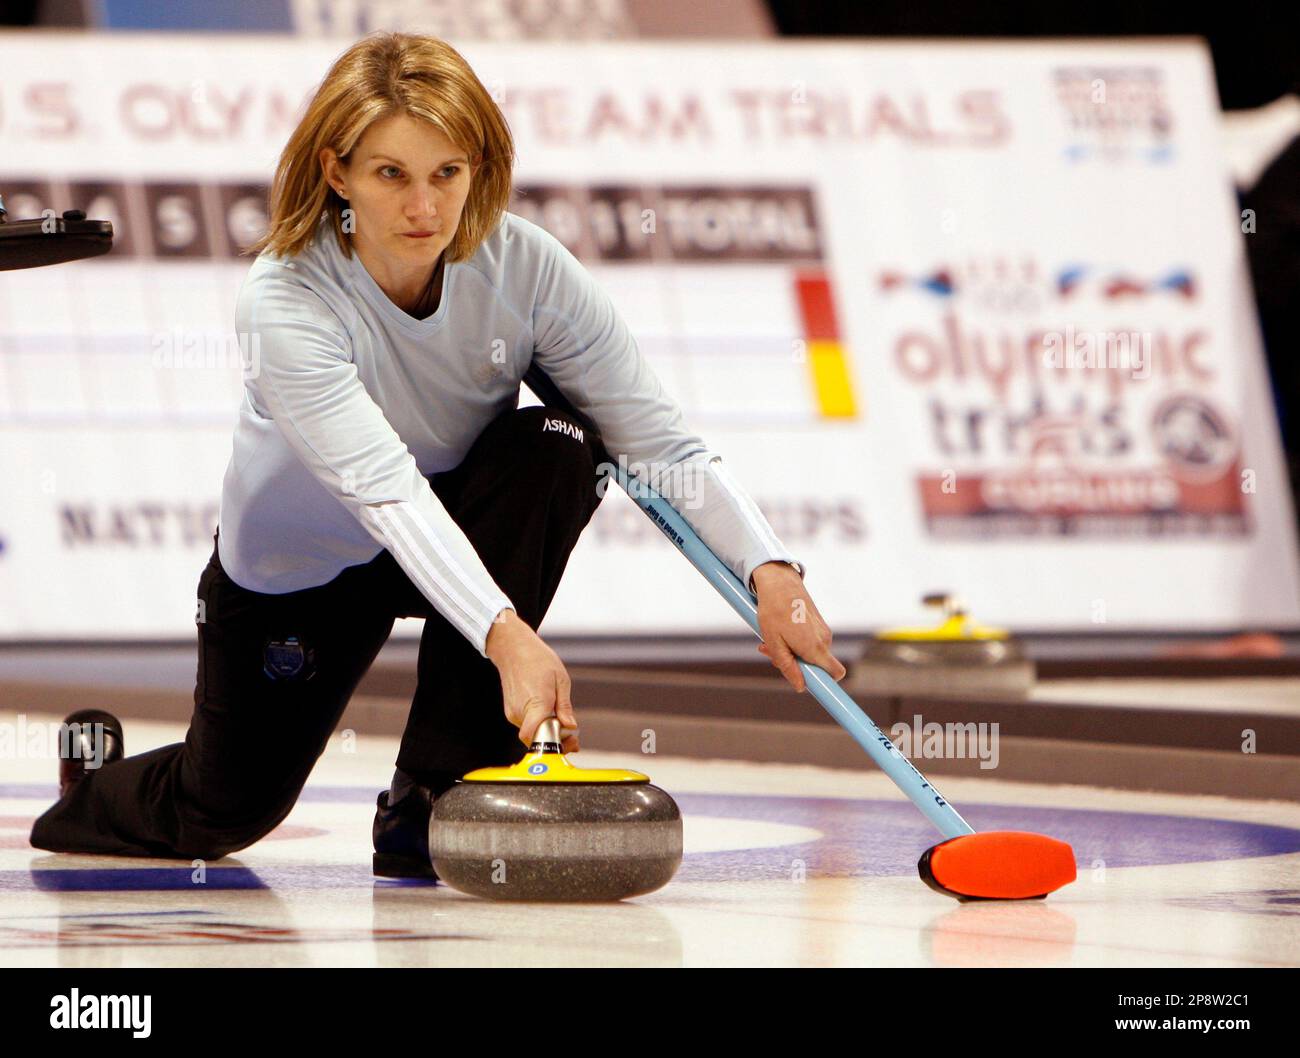 Skip Erika Brown, who now lives in Oakville, Ontario, Canada, but hails originally from Madison, Wis., releases a stone during the fifth draw at the USA Olympic Curling Trials in Broomfield, Colo.,